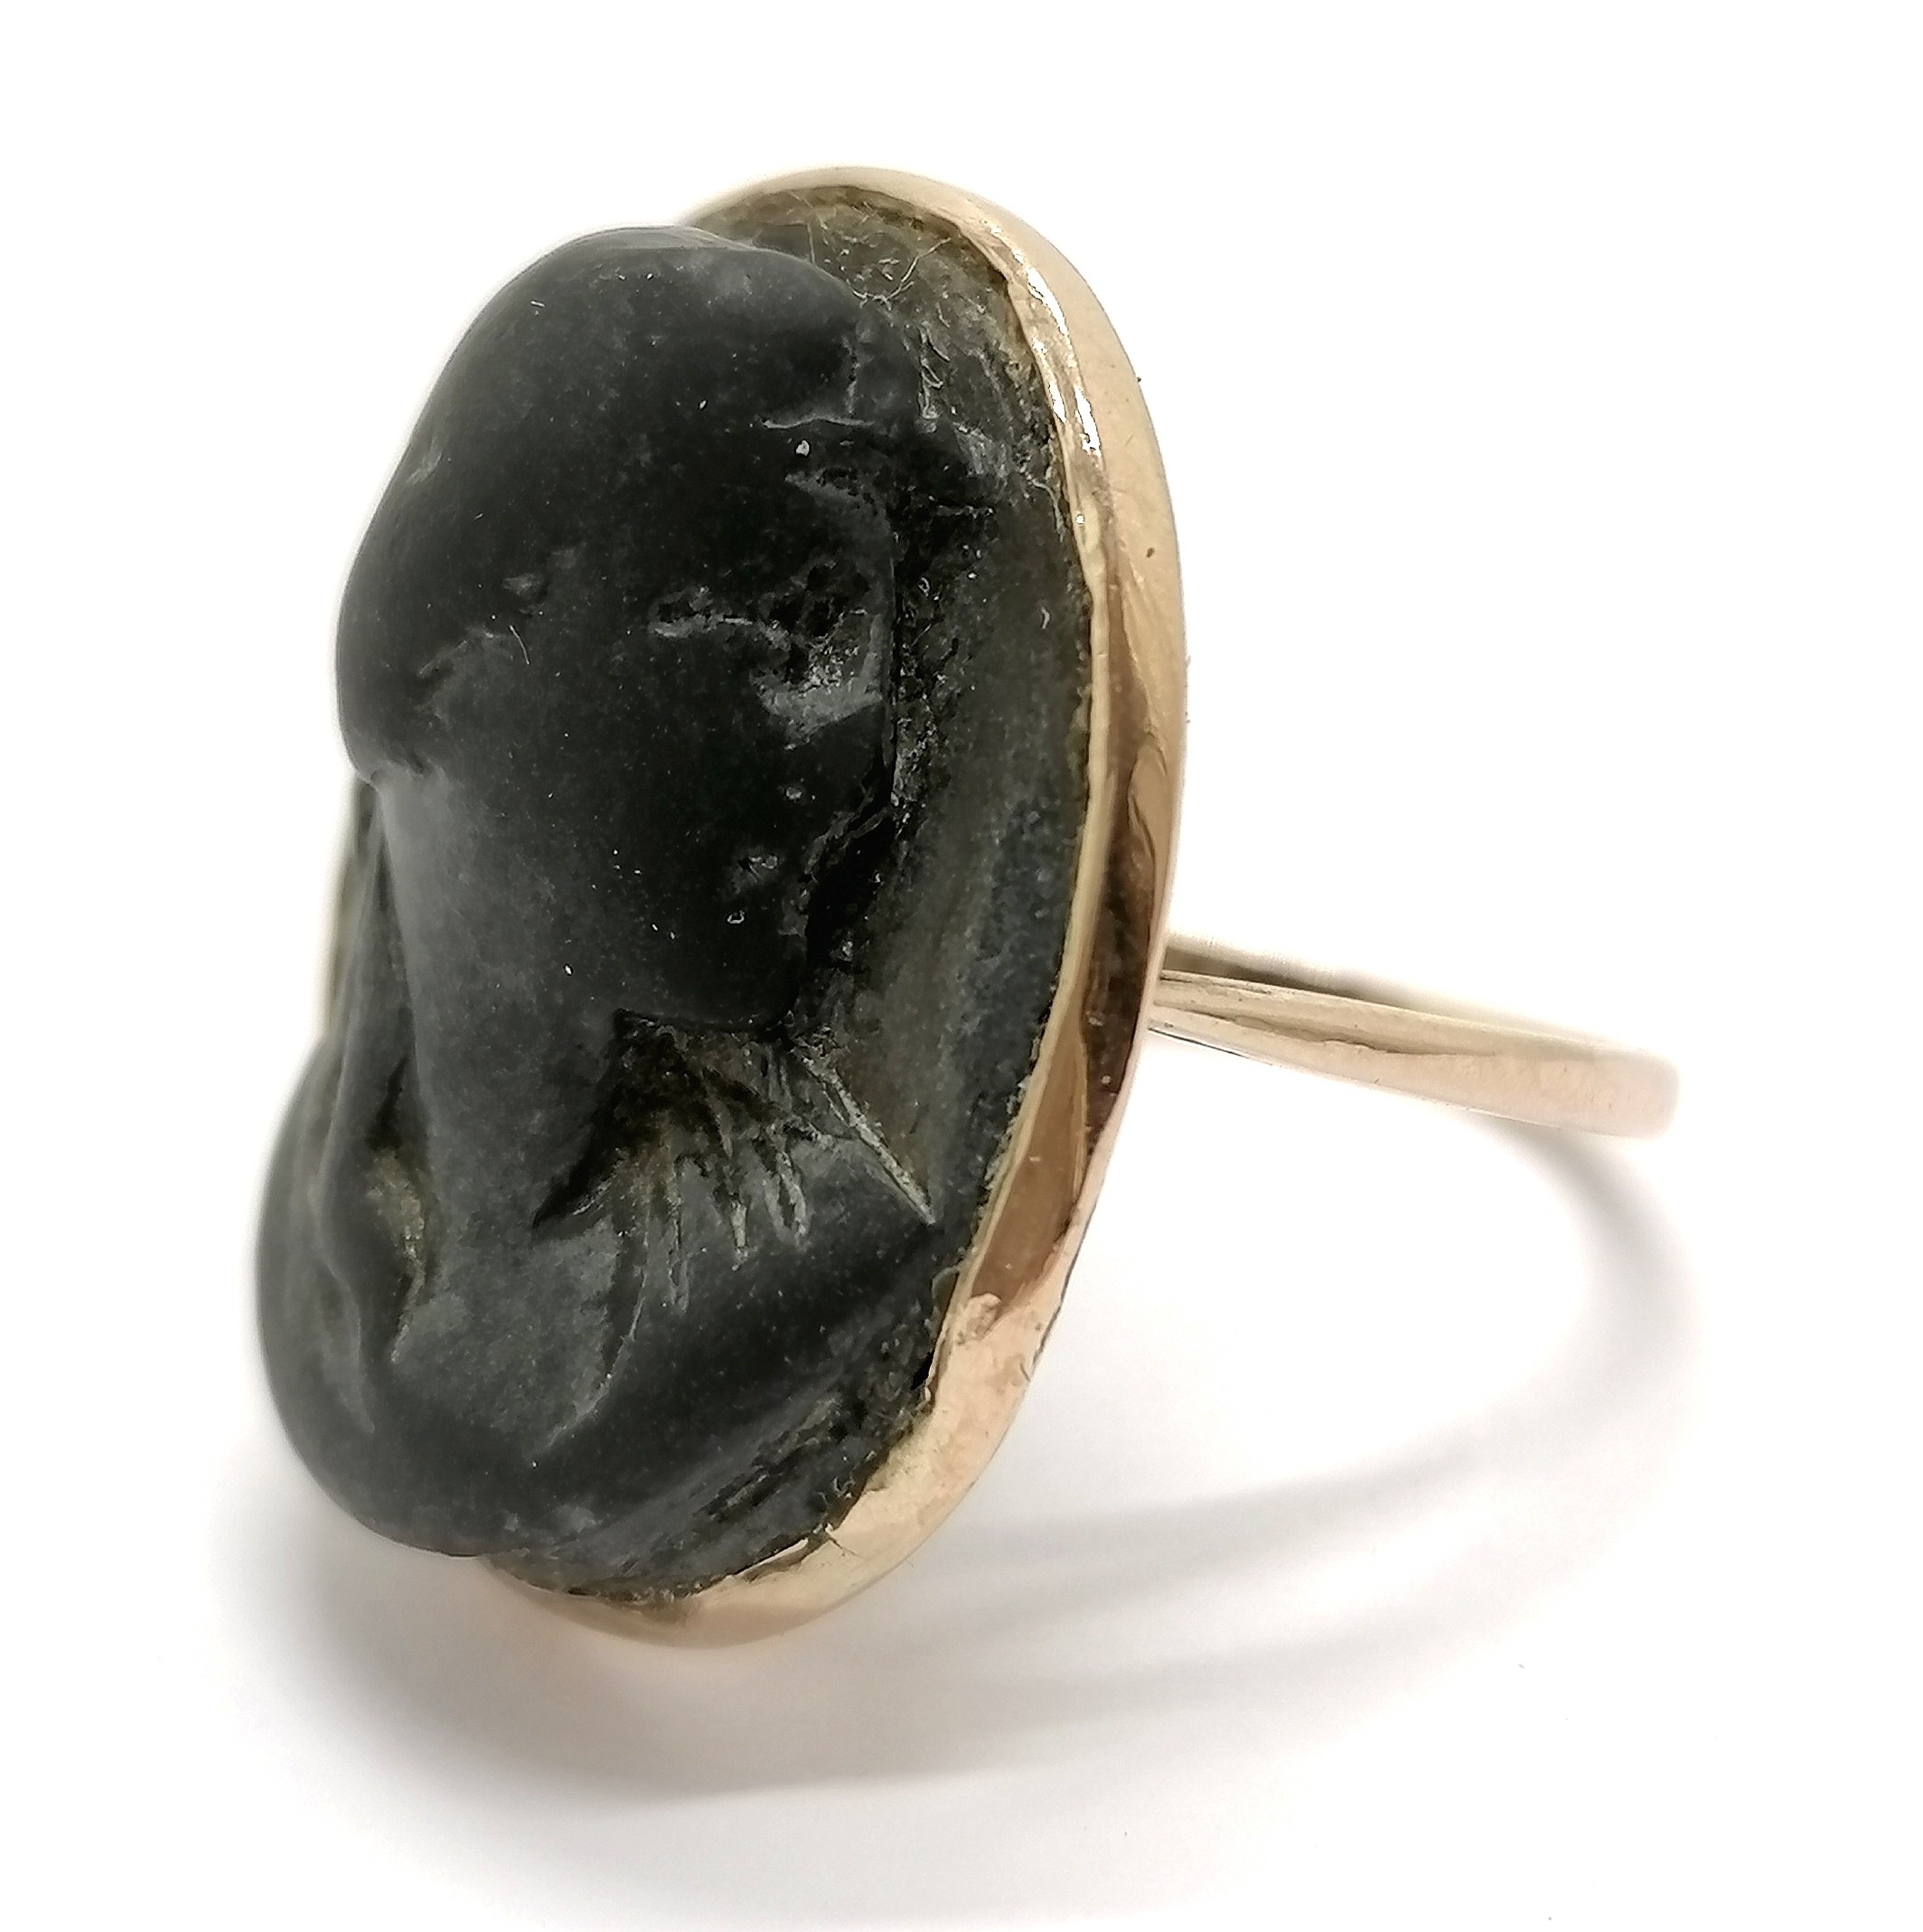 Antique 9ct marked gold hand carved black lava cameo ring - size R & 7.1g total weight - Image 6 of 6